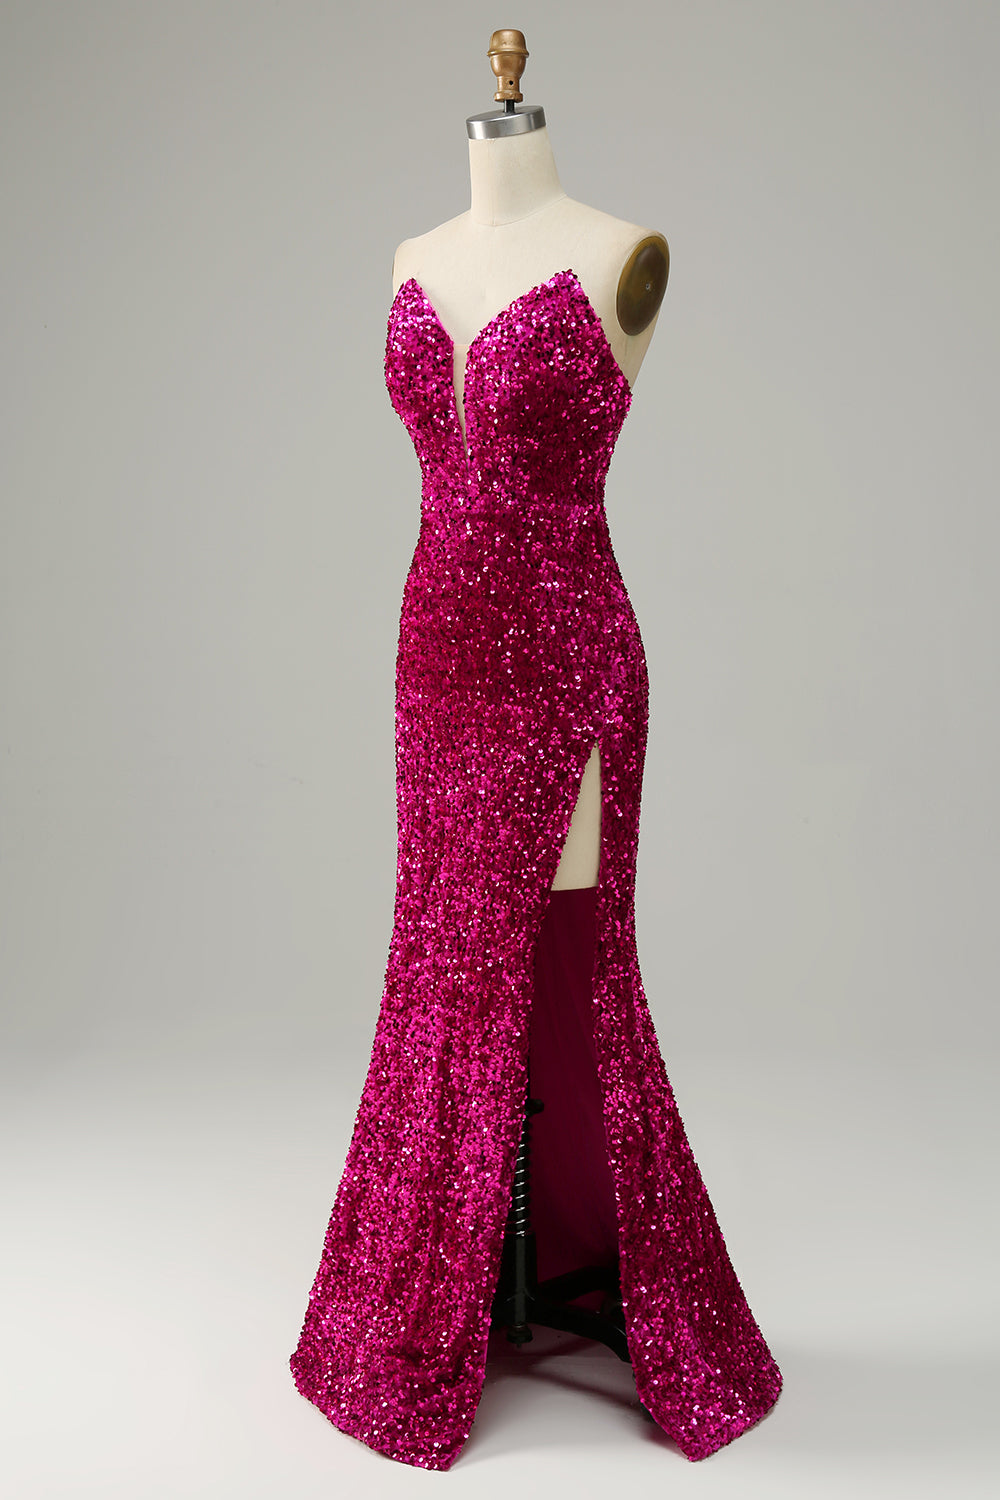 Hot Pink Strapless Sequin Prom Dress with Slit